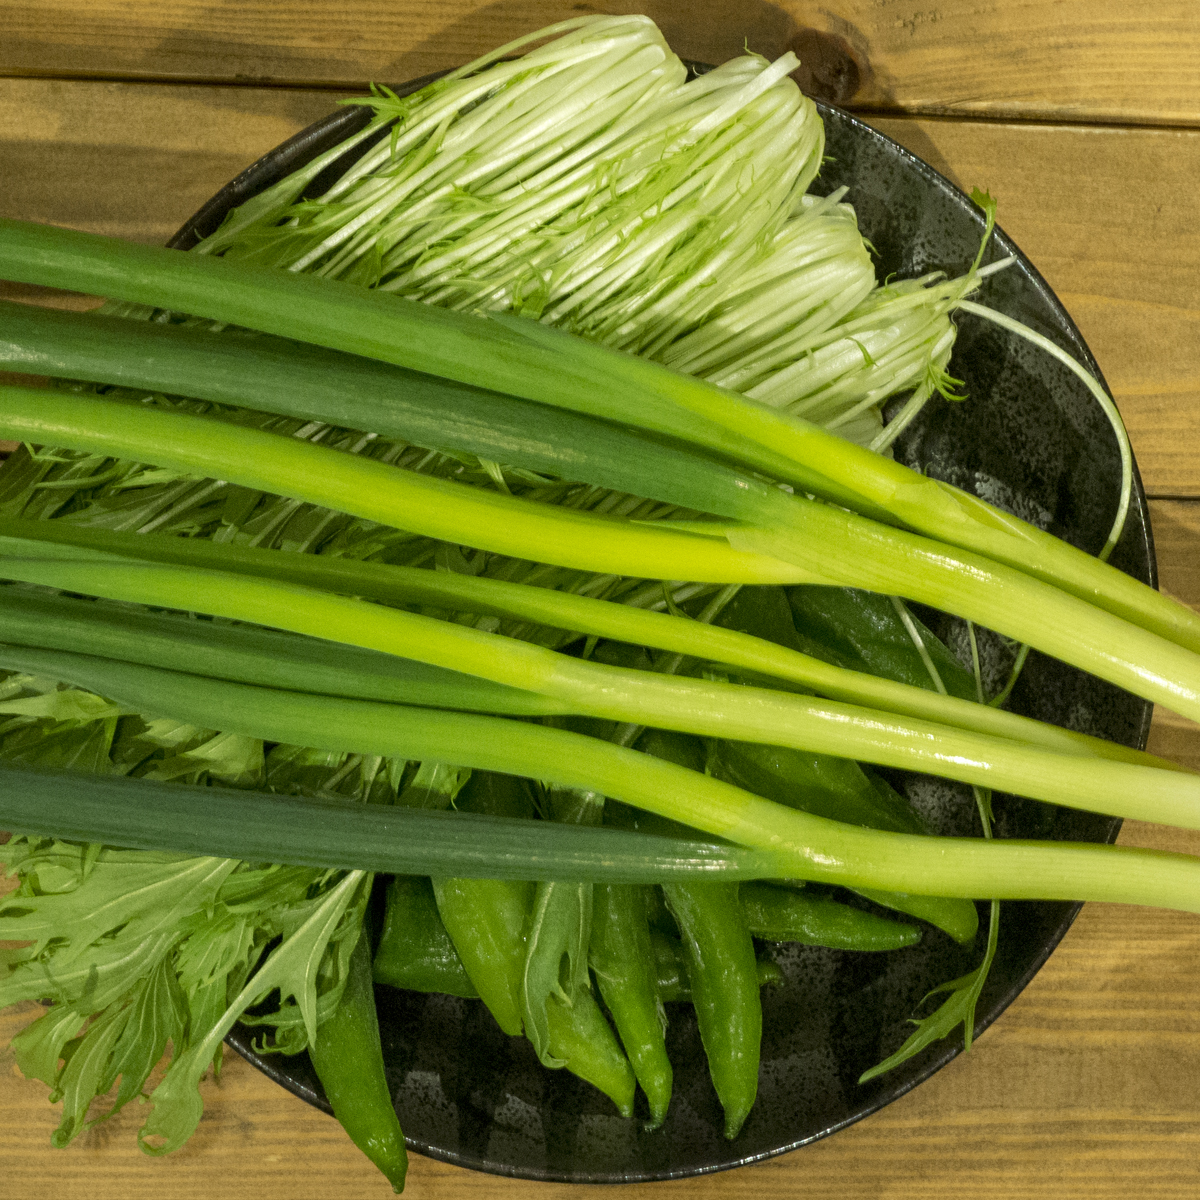 Vegetables that give you a taste of Kyoto